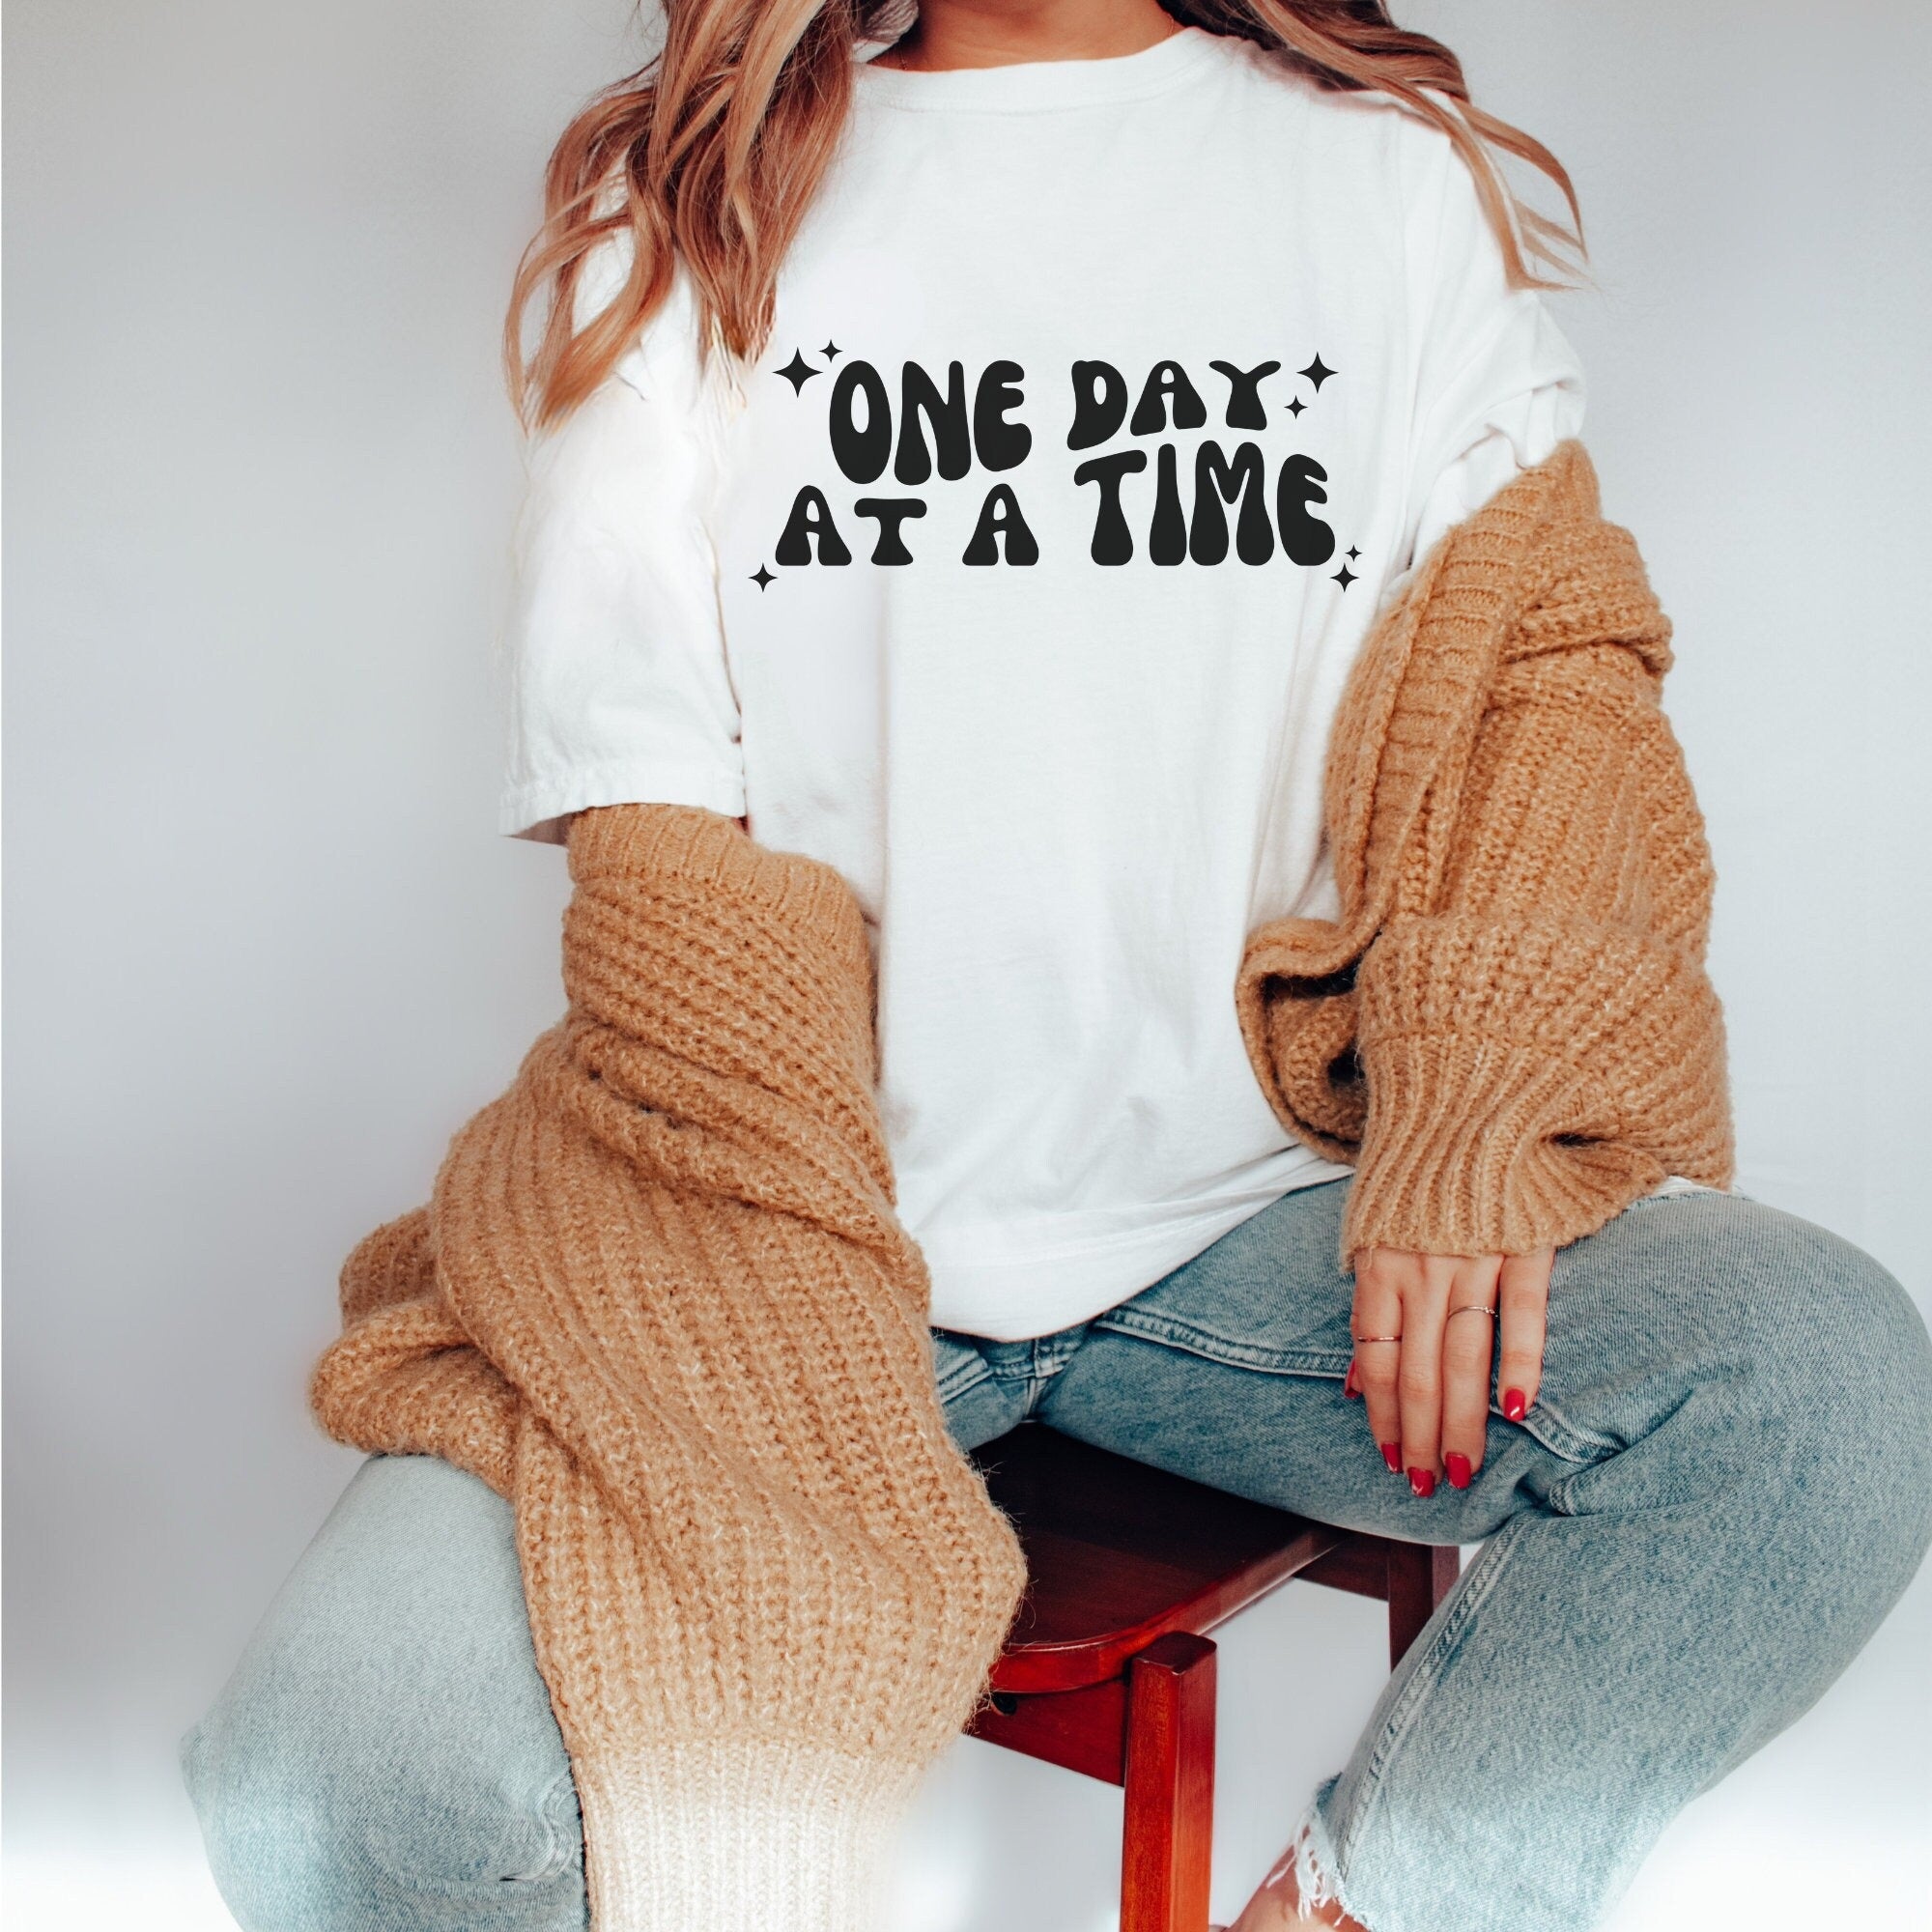 One Day At A Time Sober Tshirt